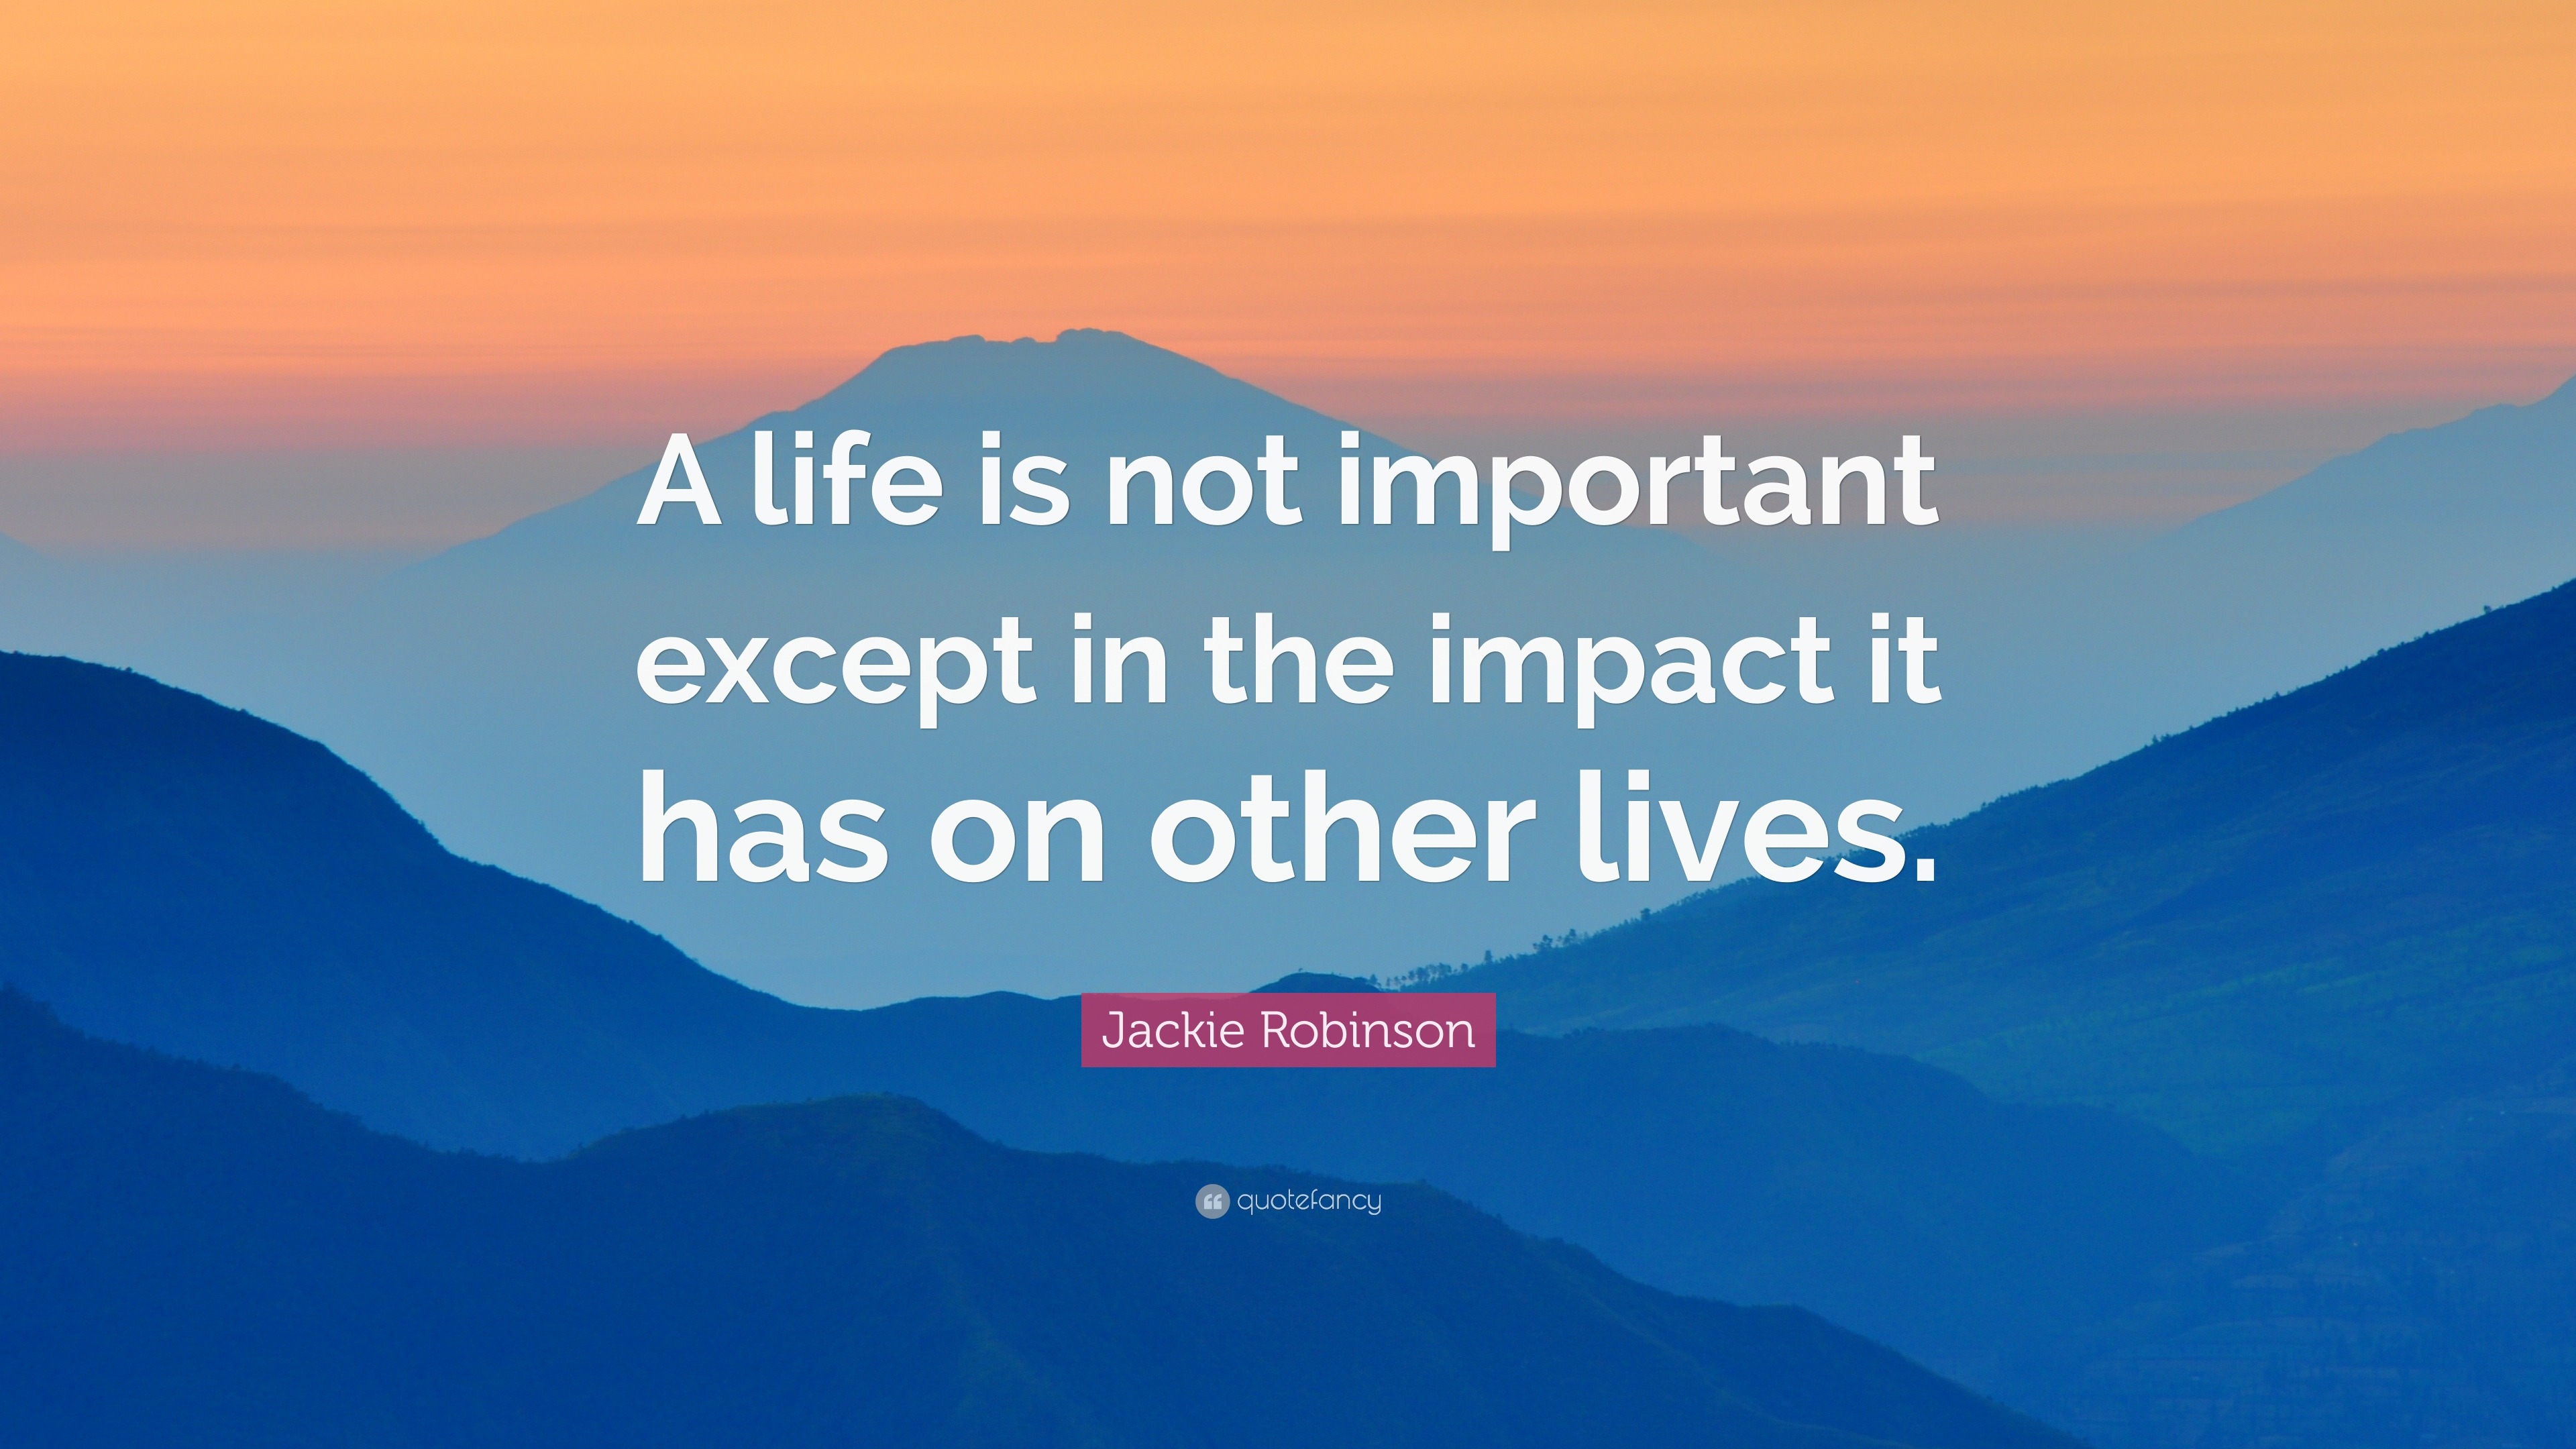 37515 Jackie Robinson Quote A life is not important except in the impact